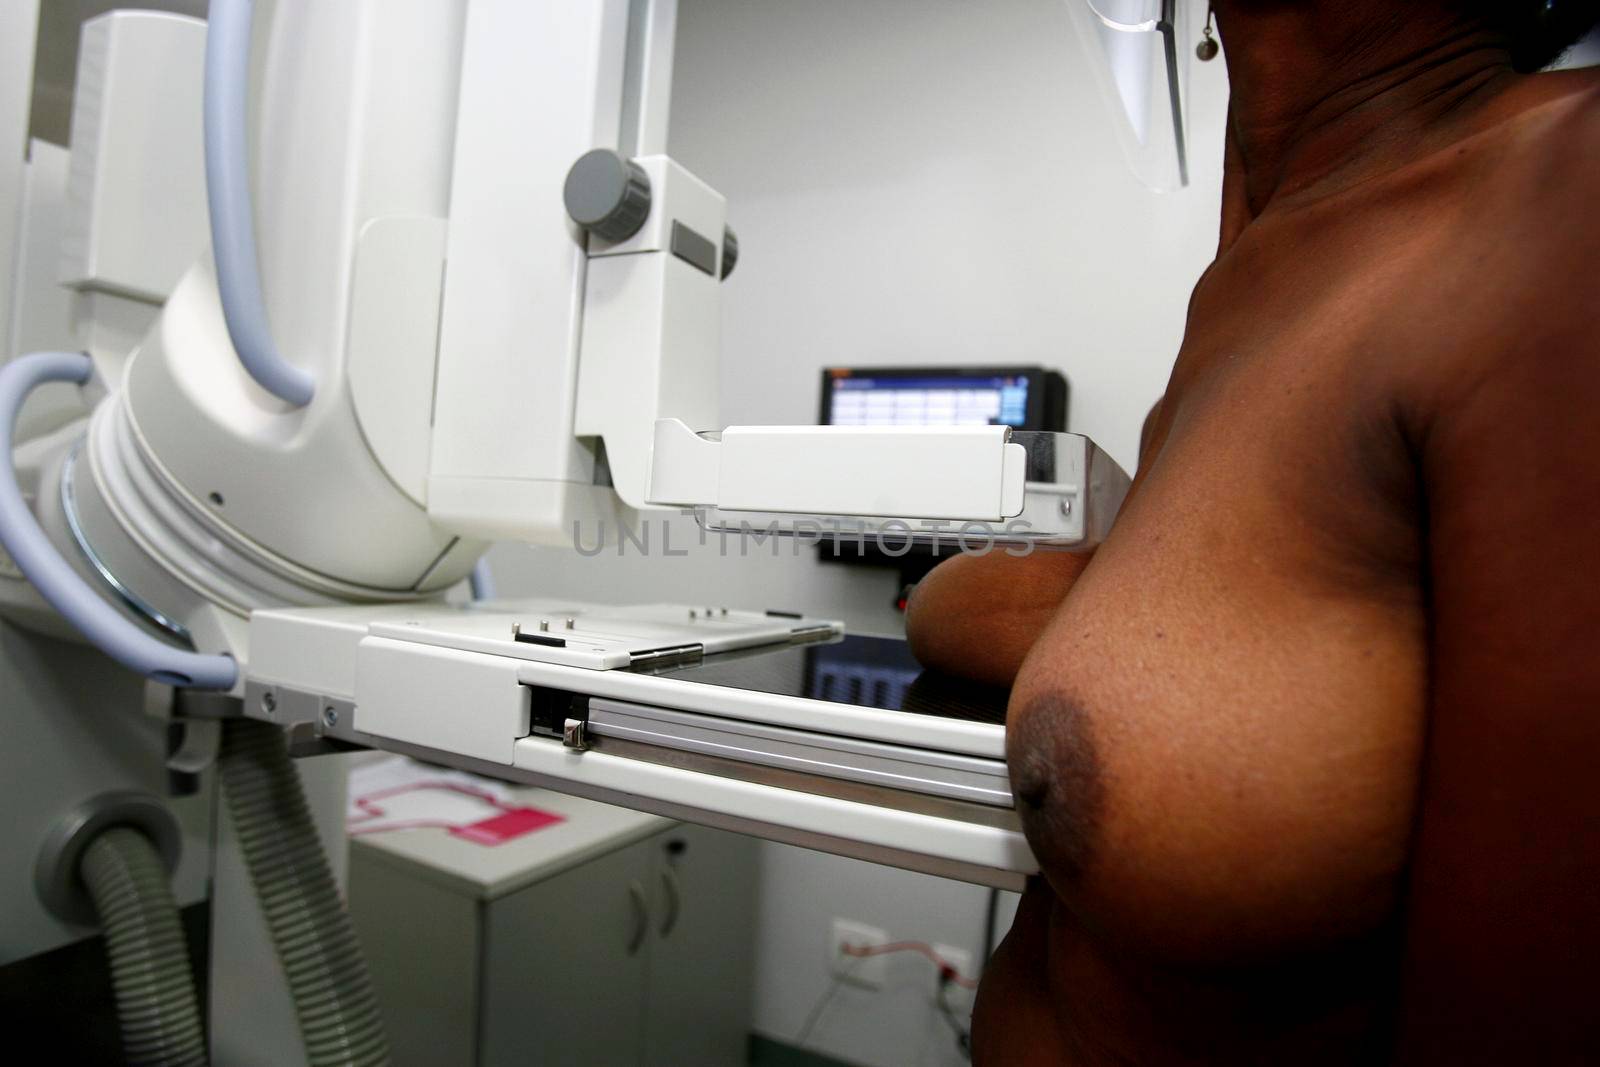 salvador, bahia / brazil - october 22, 2014: woman is seen during mammography exam to detect breast cancer in the city of Salvador.